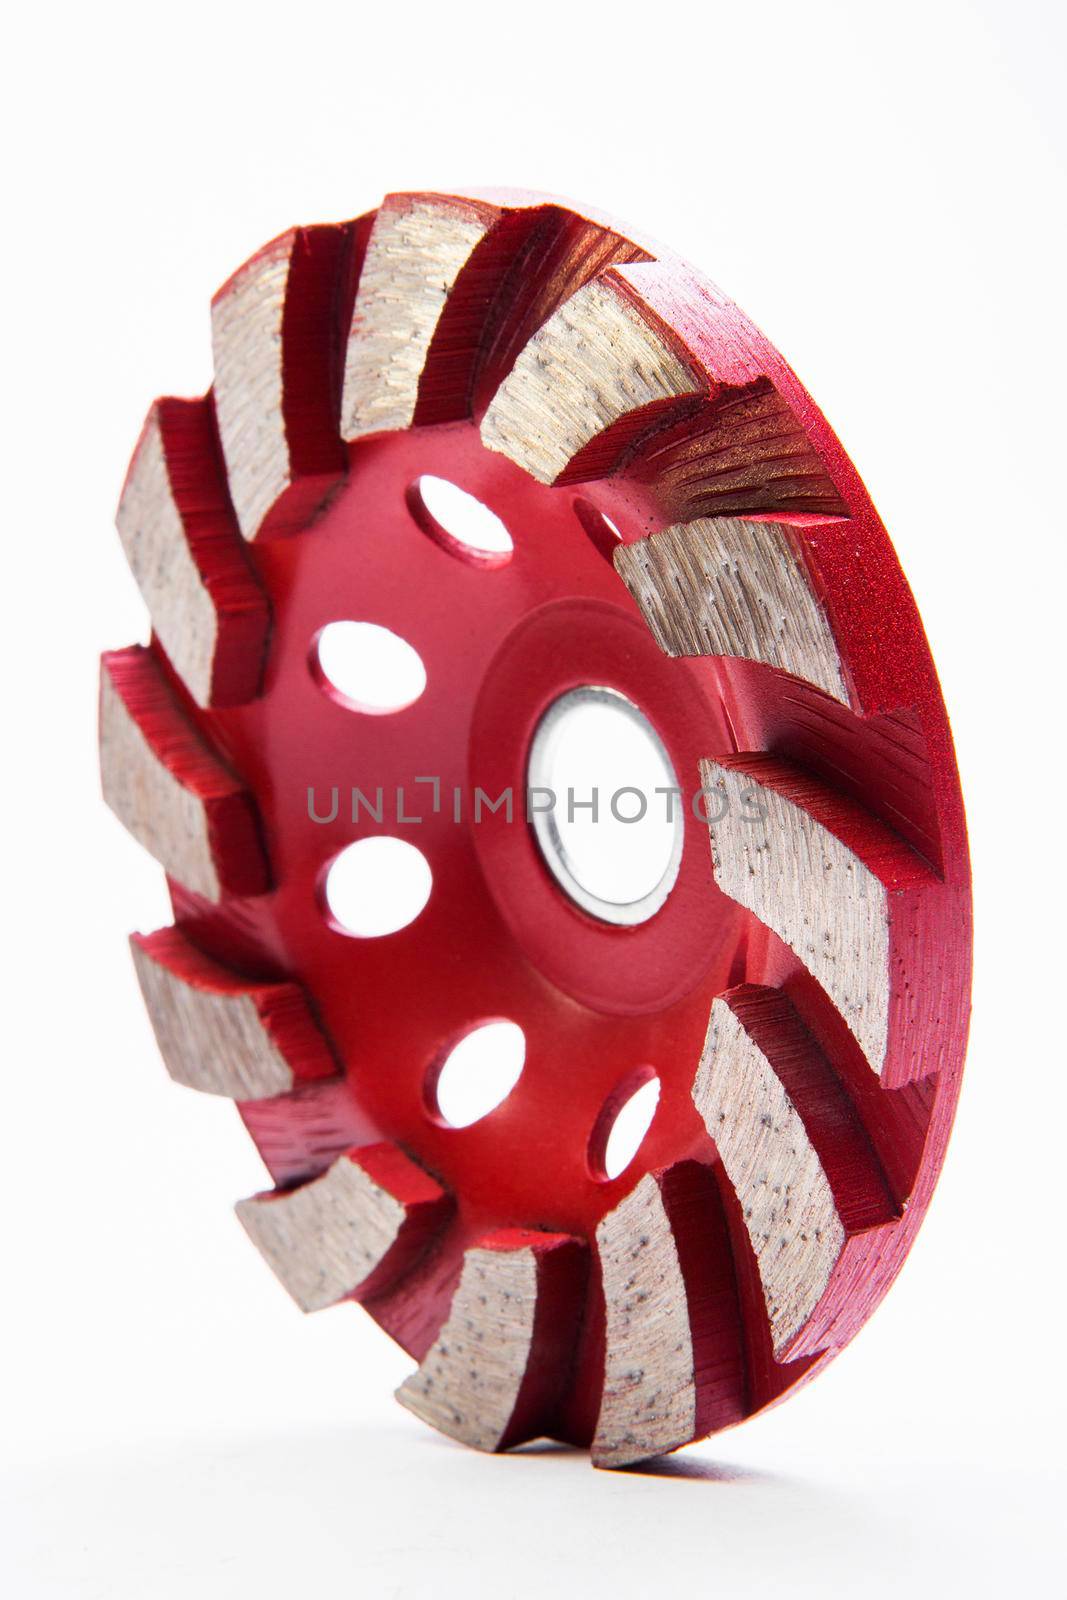 Red grinding wheel on white background by titipong